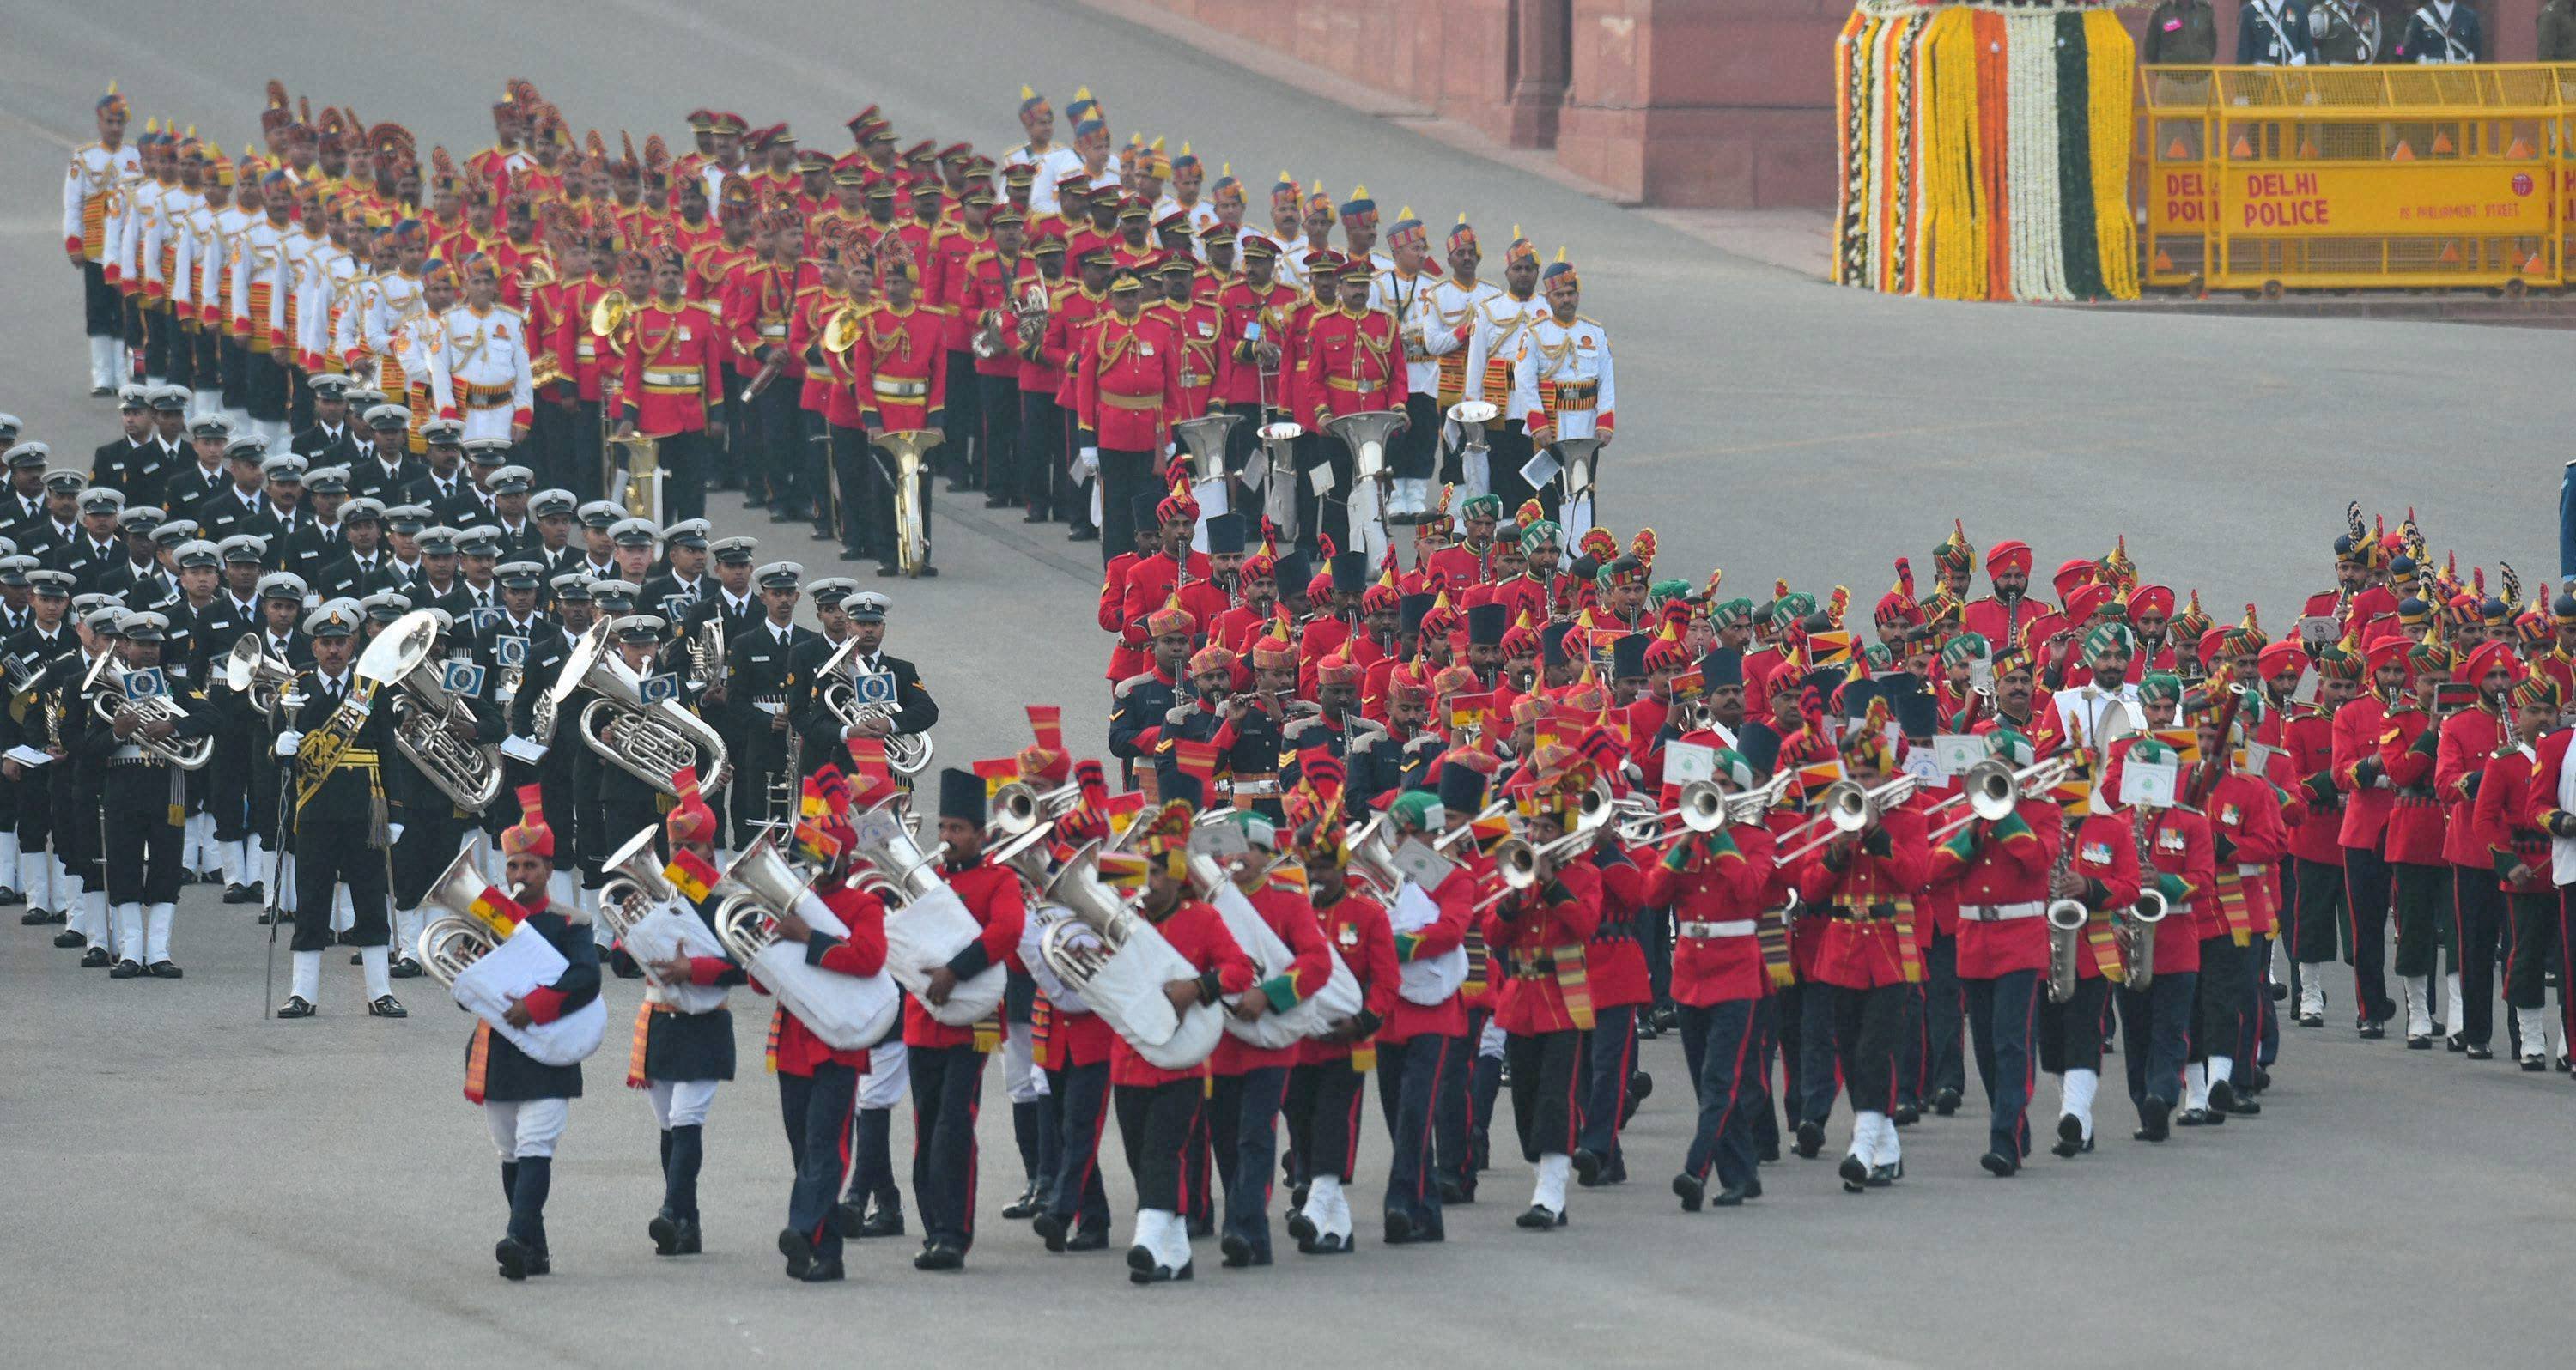 Here are 10 best photos from Beating Retreat ceremony that marked the